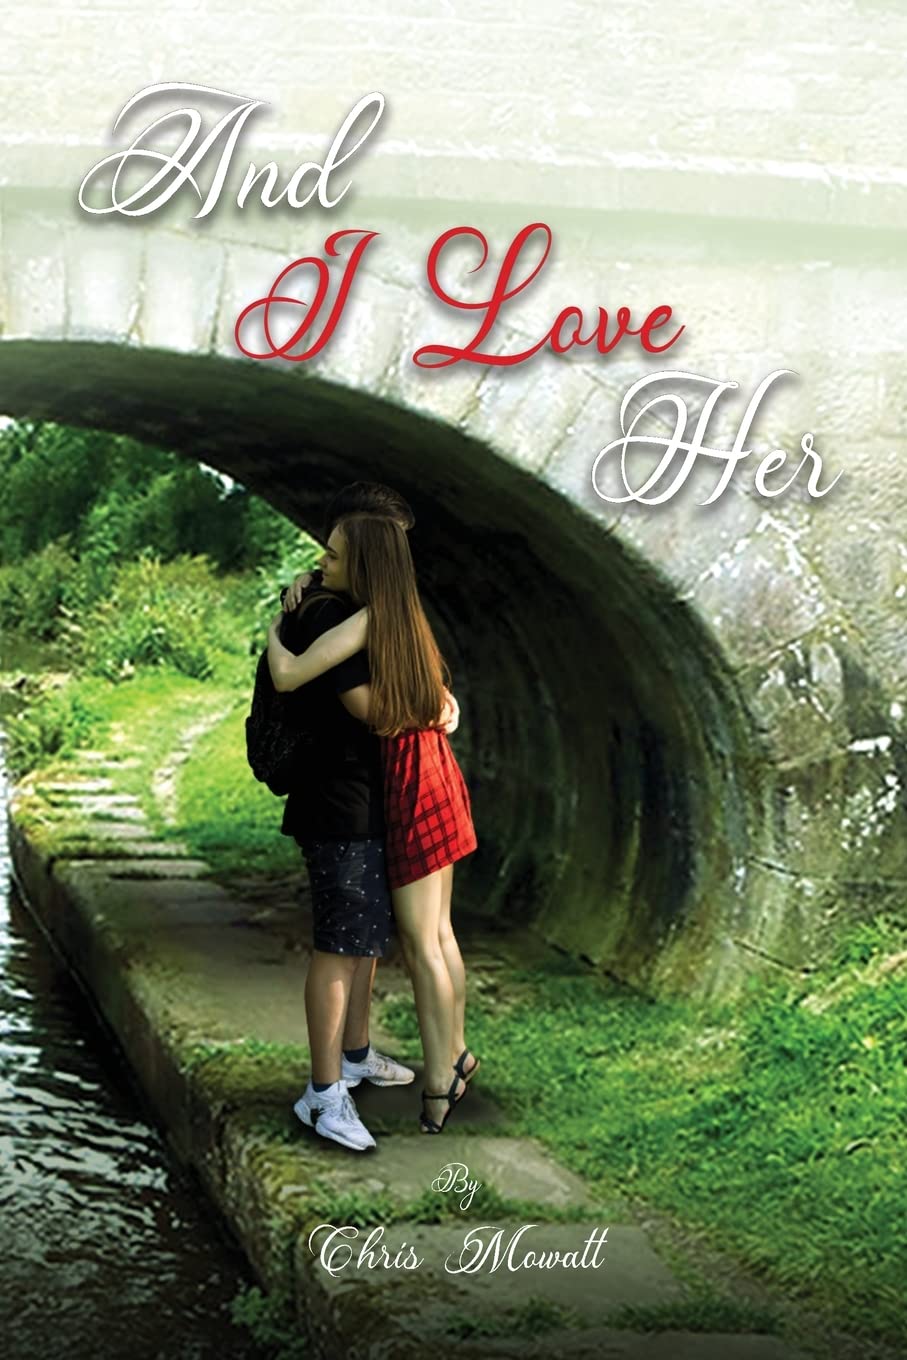 Chris Mowatt Amazes Readers with Young Adult Novel About Two Lost Lovers